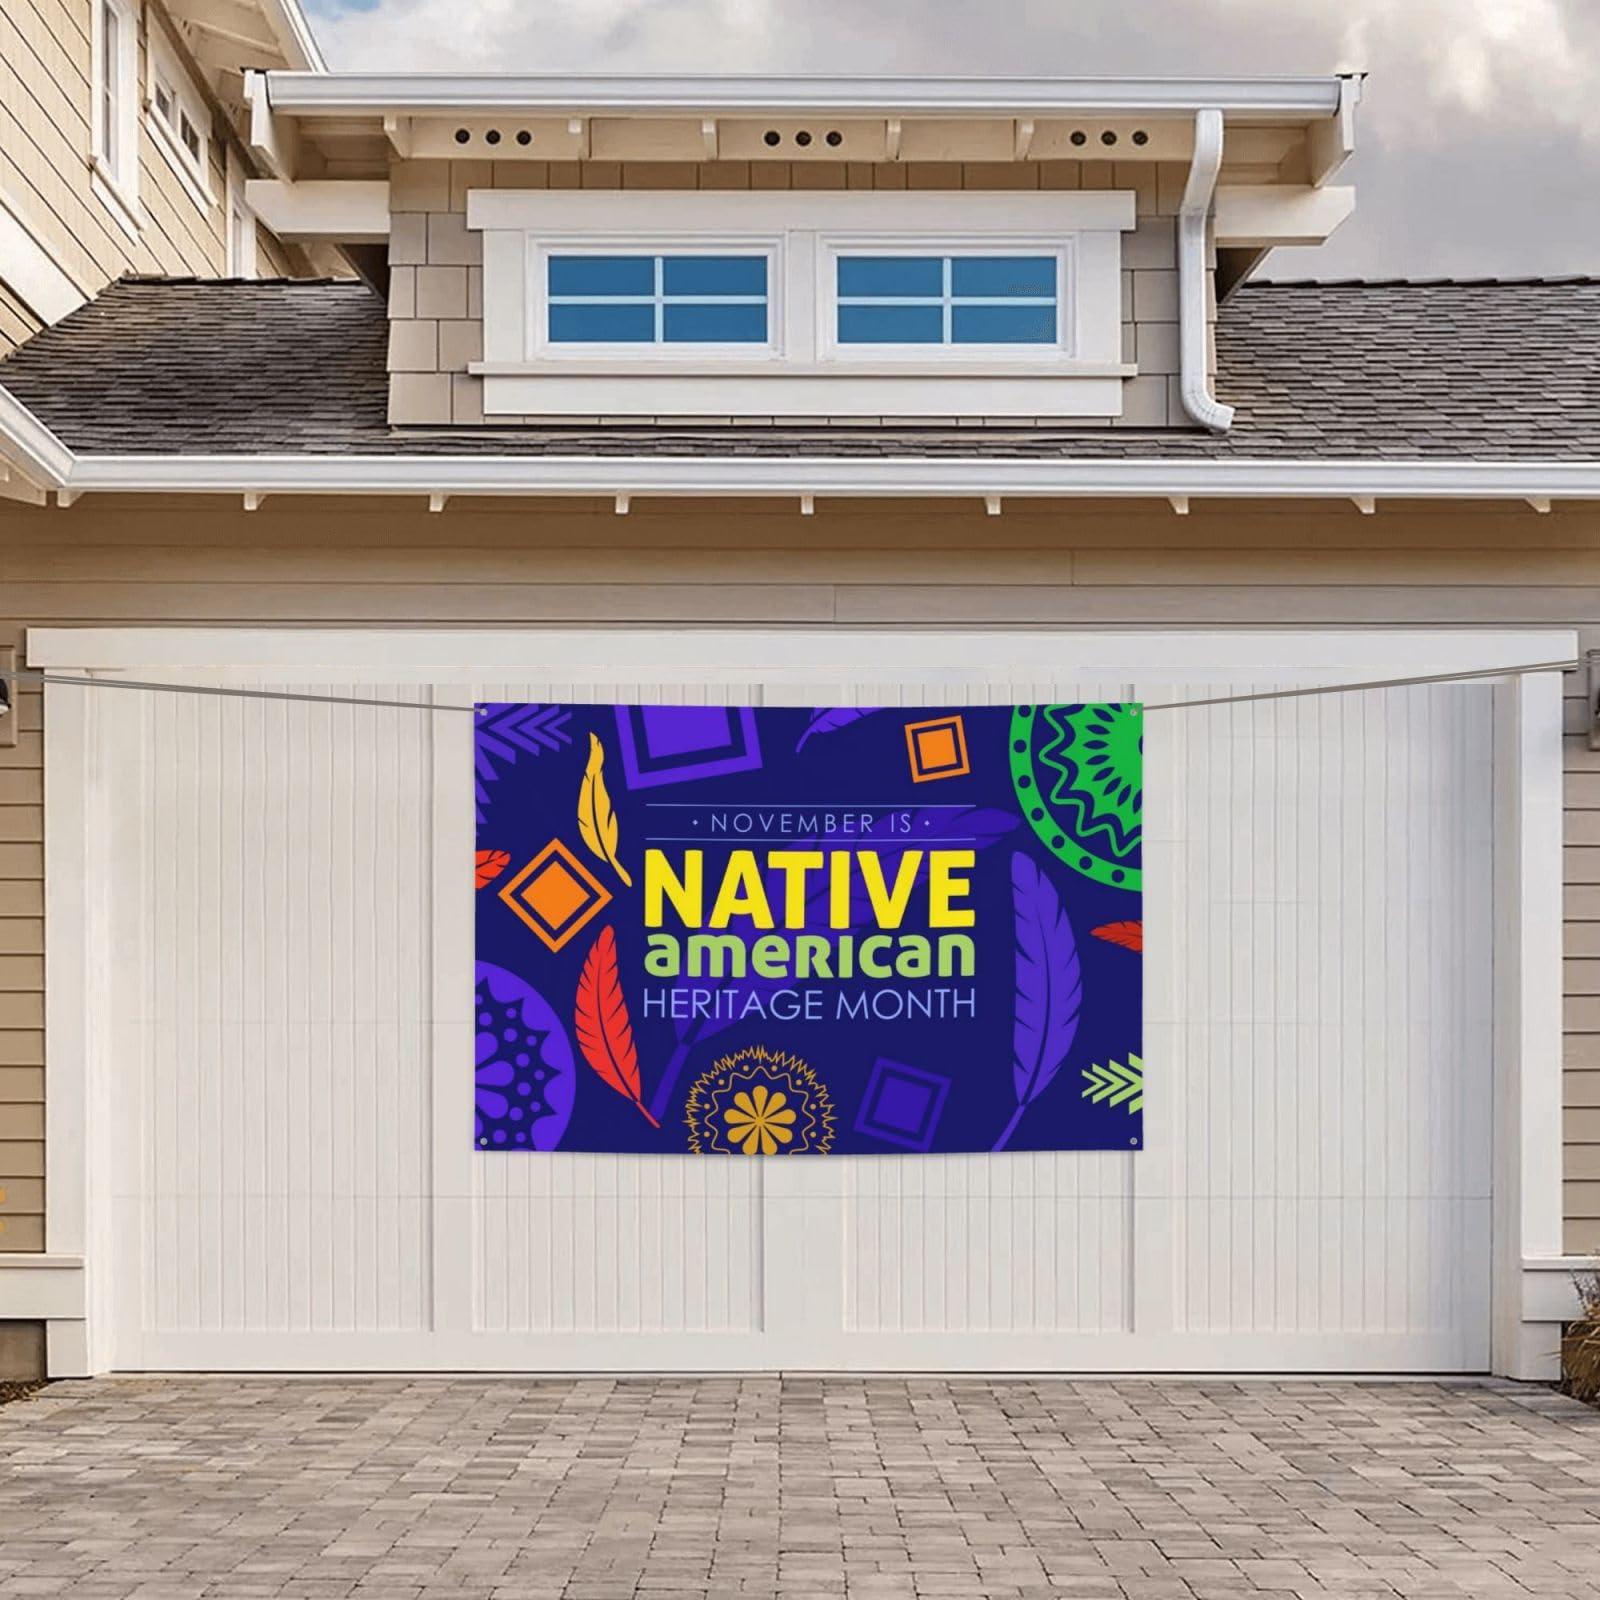 November is Native American Heritage Month Backdrop Banner Holiday Decoration Photo Booth Background Tapestry Decor Supplies for Party Home Office 47 * 71 Inches